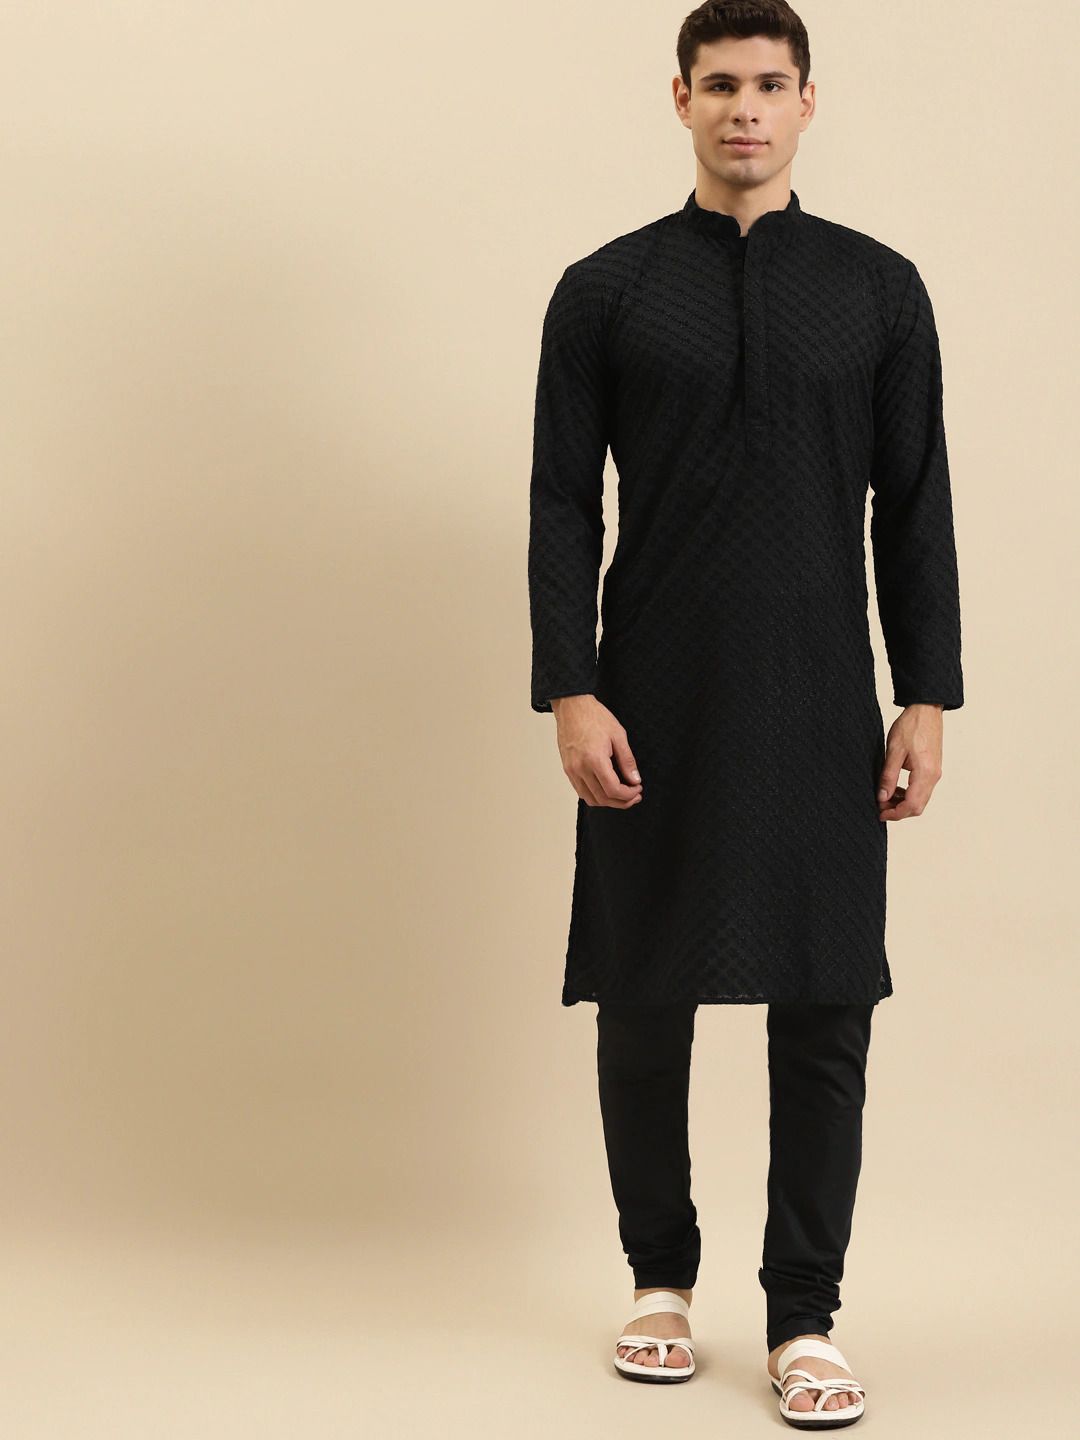 Can straight pants be worn with a kurta? - Quora